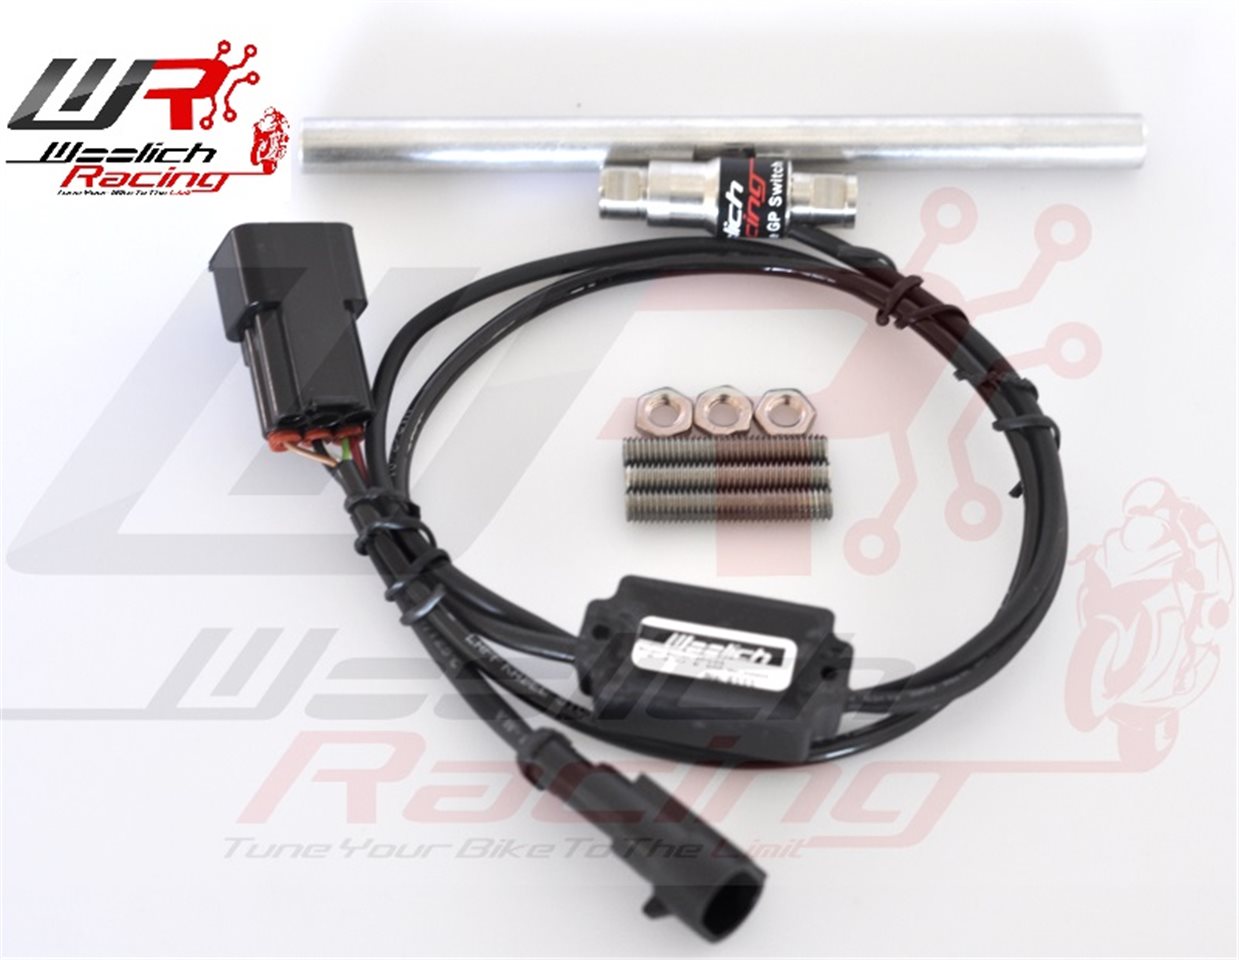 Honda CBR1000RR quickshifter + launch control race Tool 1 including High Performance ECU Flash Tuning - Click Image to Close